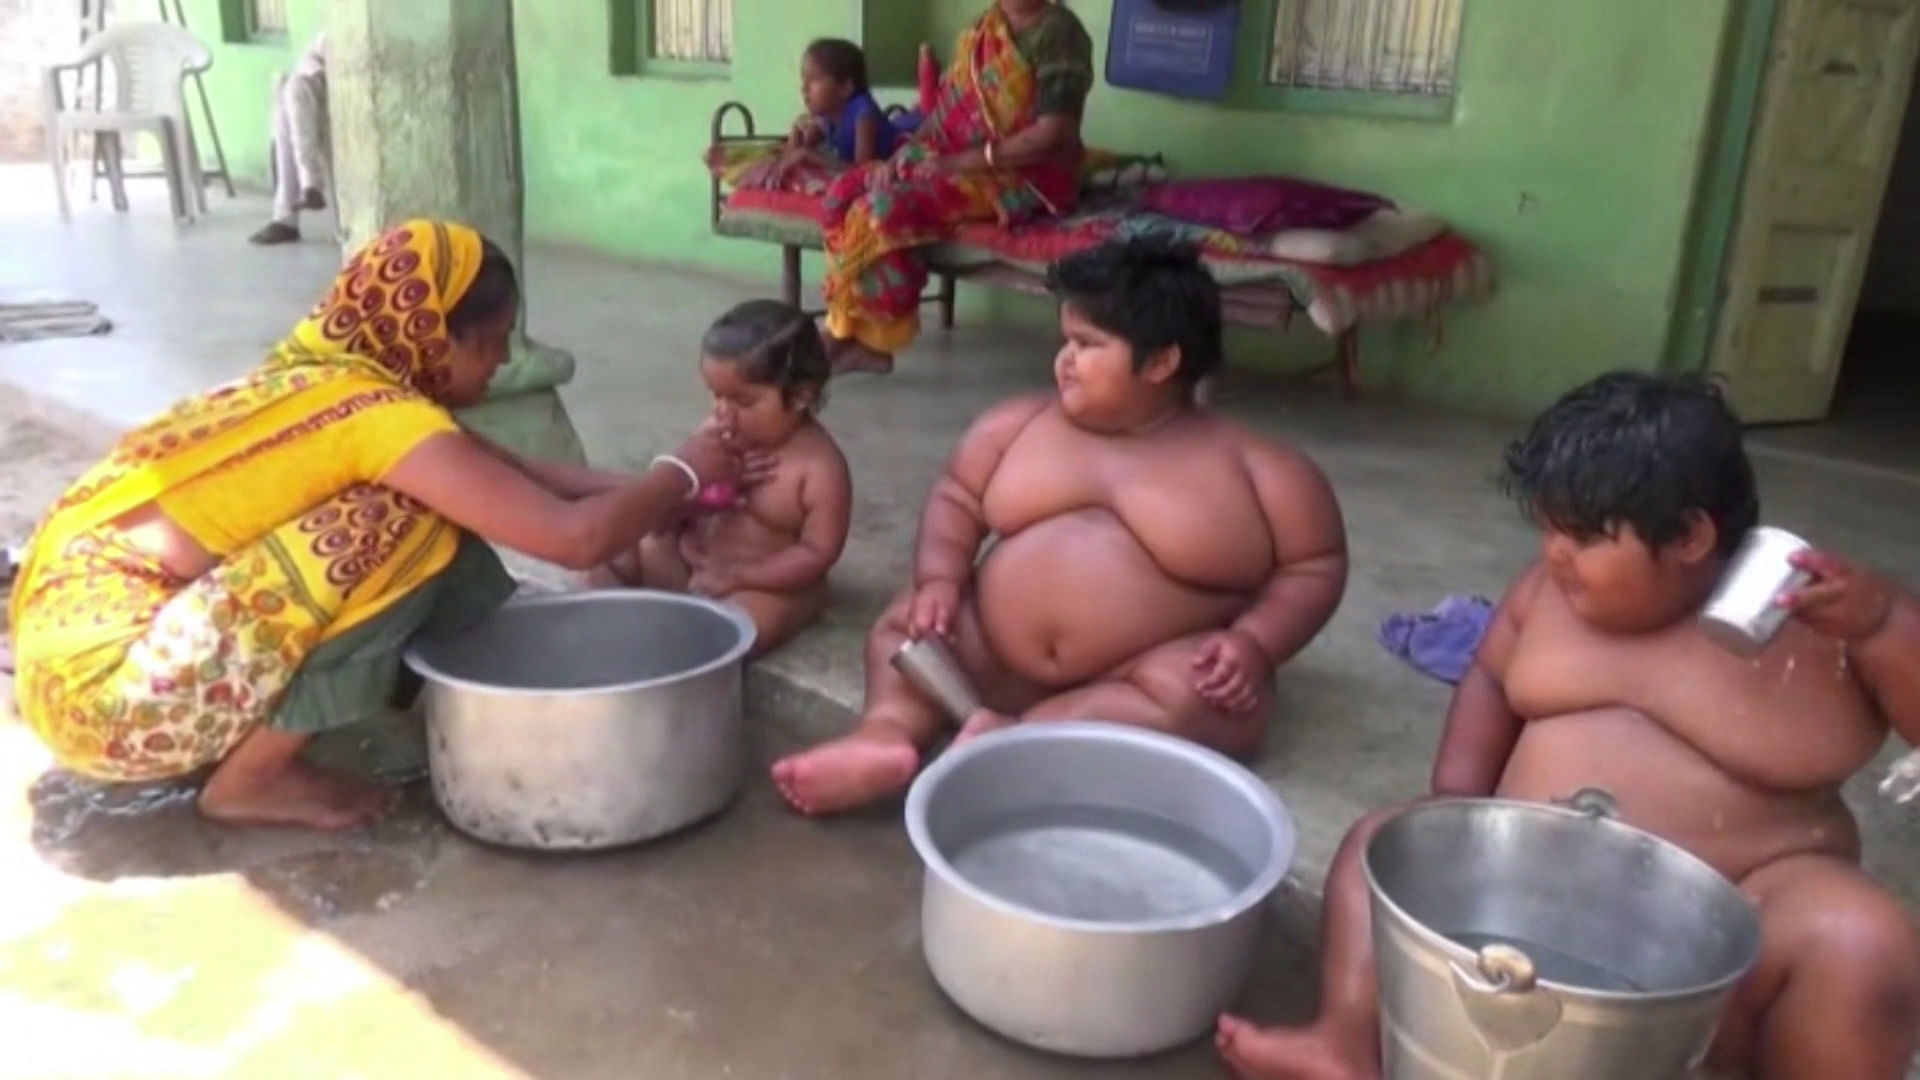 Ramesh Nandwana from Una, Gujarat says the kids lost a little weight initially after surgery but have been steadily putting on kilos ever since. (Photo: AP/Newsflare Screengrab)